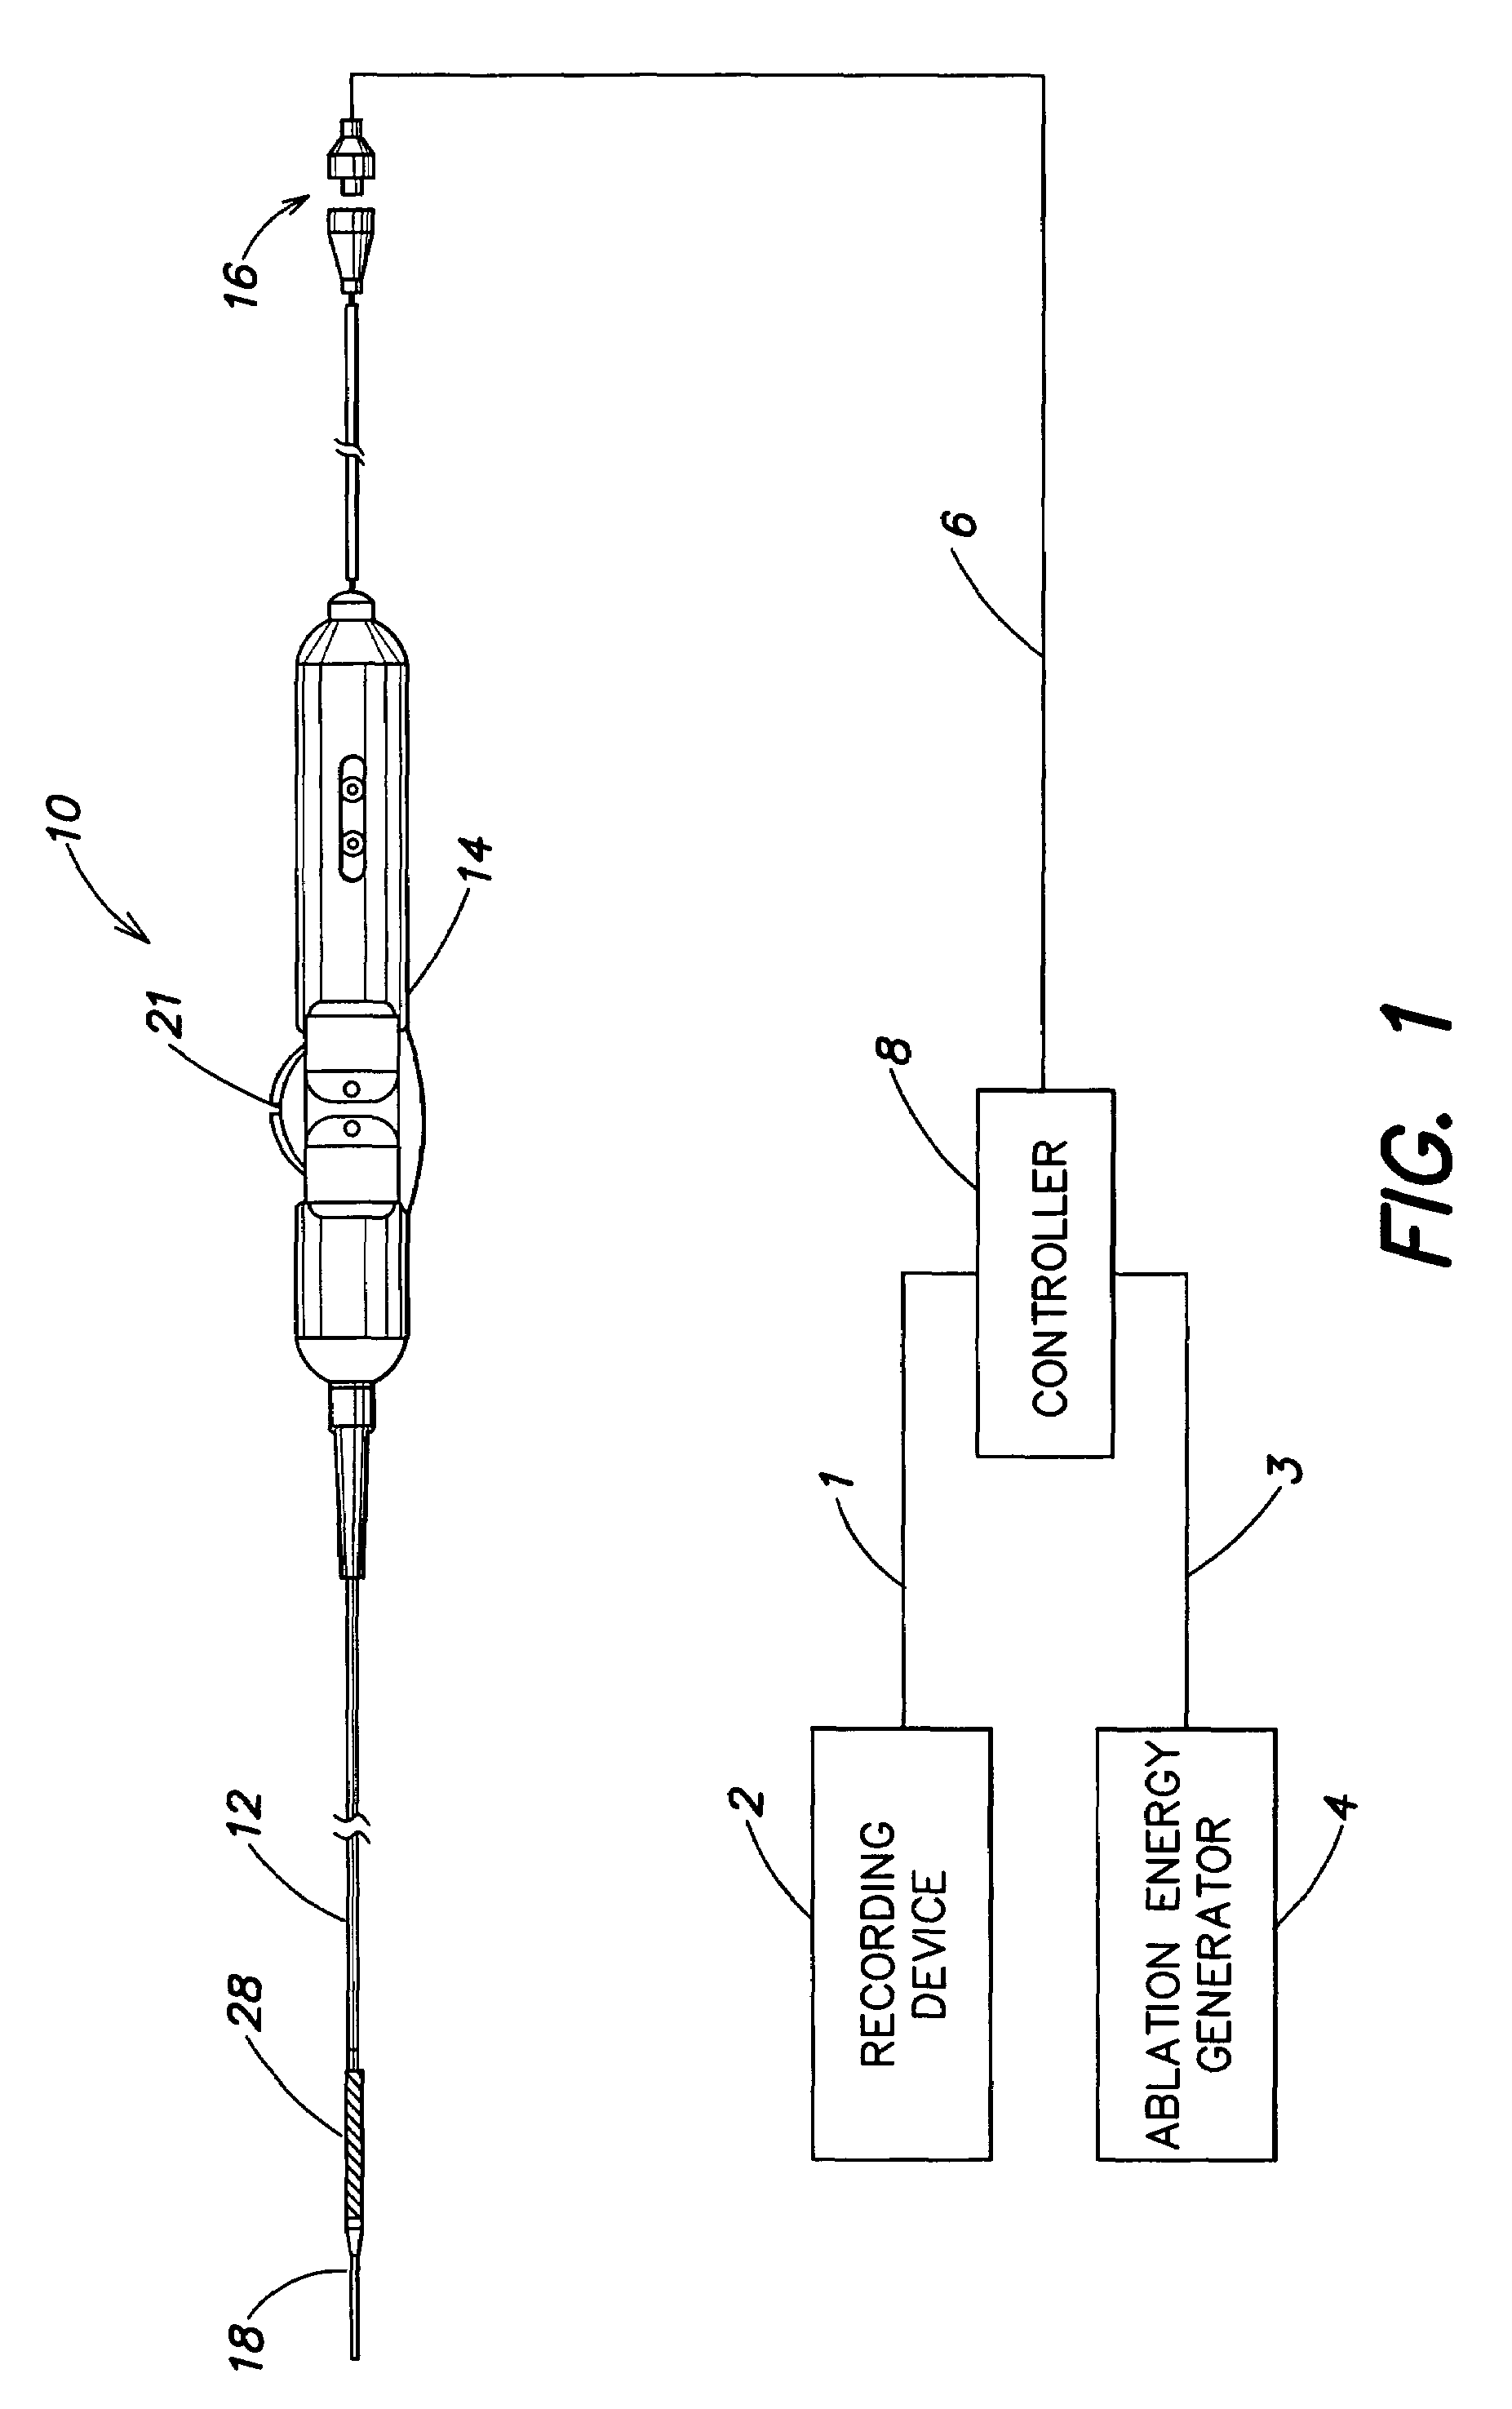 Systems and methods for three-dimensional mapping of electrical activity